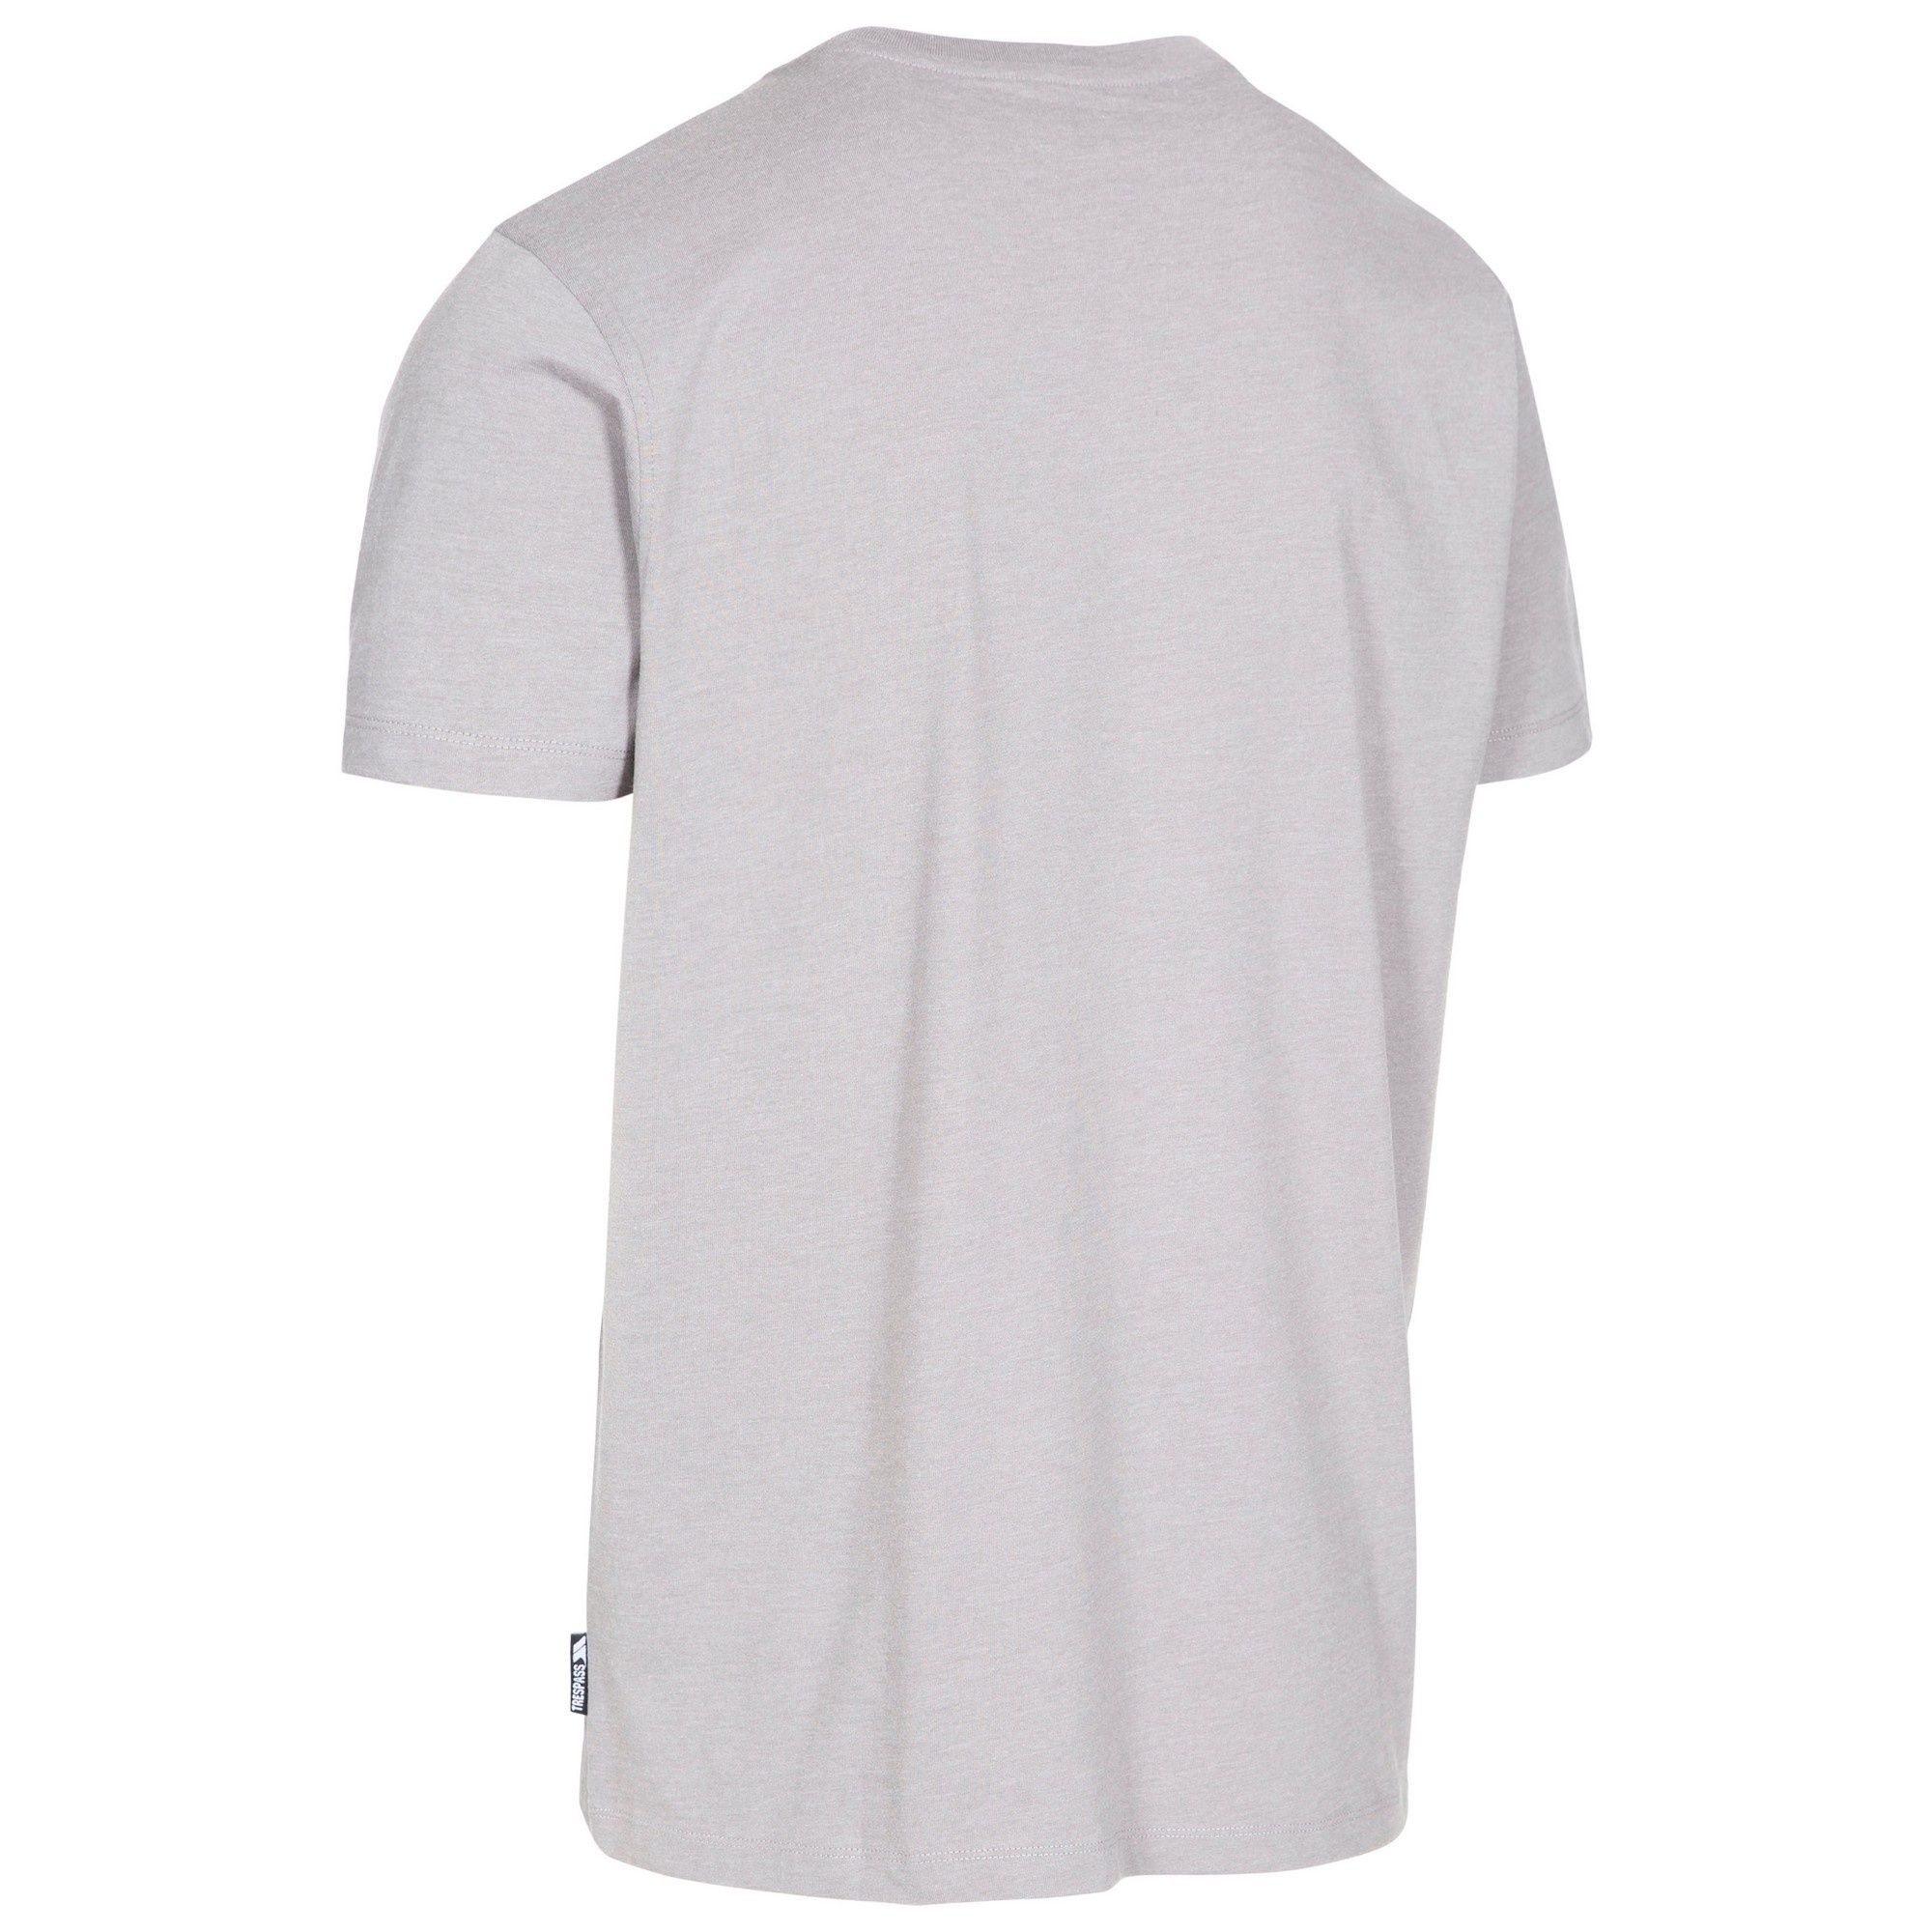 60% Cotton, 40% Polyester. 180gsm. Short sleeves. Round neck. Print on chest. Wicking. Quick dry. Trespass Mens Chest Sizing (approx): S - 35-37in/89-94cm, M - 38-40in/96.5-101.5cm, L - 41-43in/104-109cm, XL - 44-46in/111.5-117cm, XXL - 46-48in/117-122cm, 3XL - 48-50in/122-127cm.